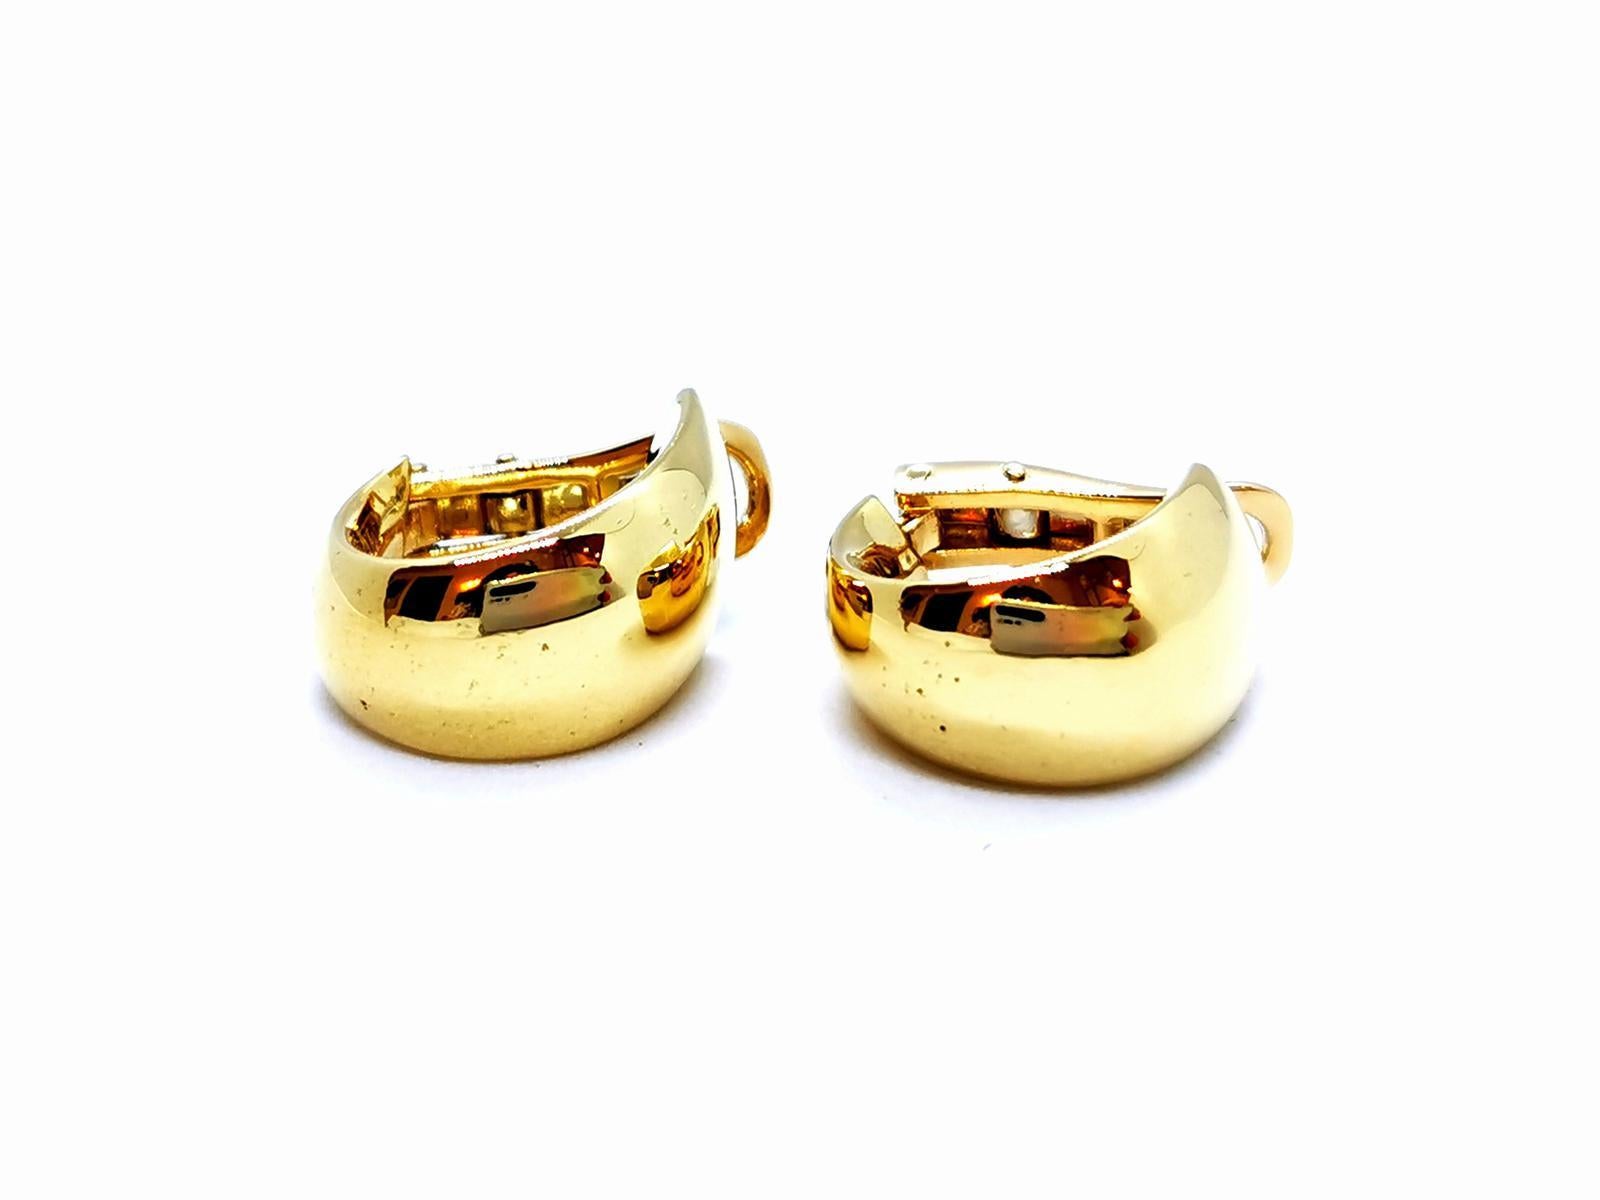 Earrings in yellow and white gold 750 thousandths (18 carats). clips. dimensions: 1.56 x 0.94 cm. total weight: 18.06 g. eagle head punch. excellent condition
